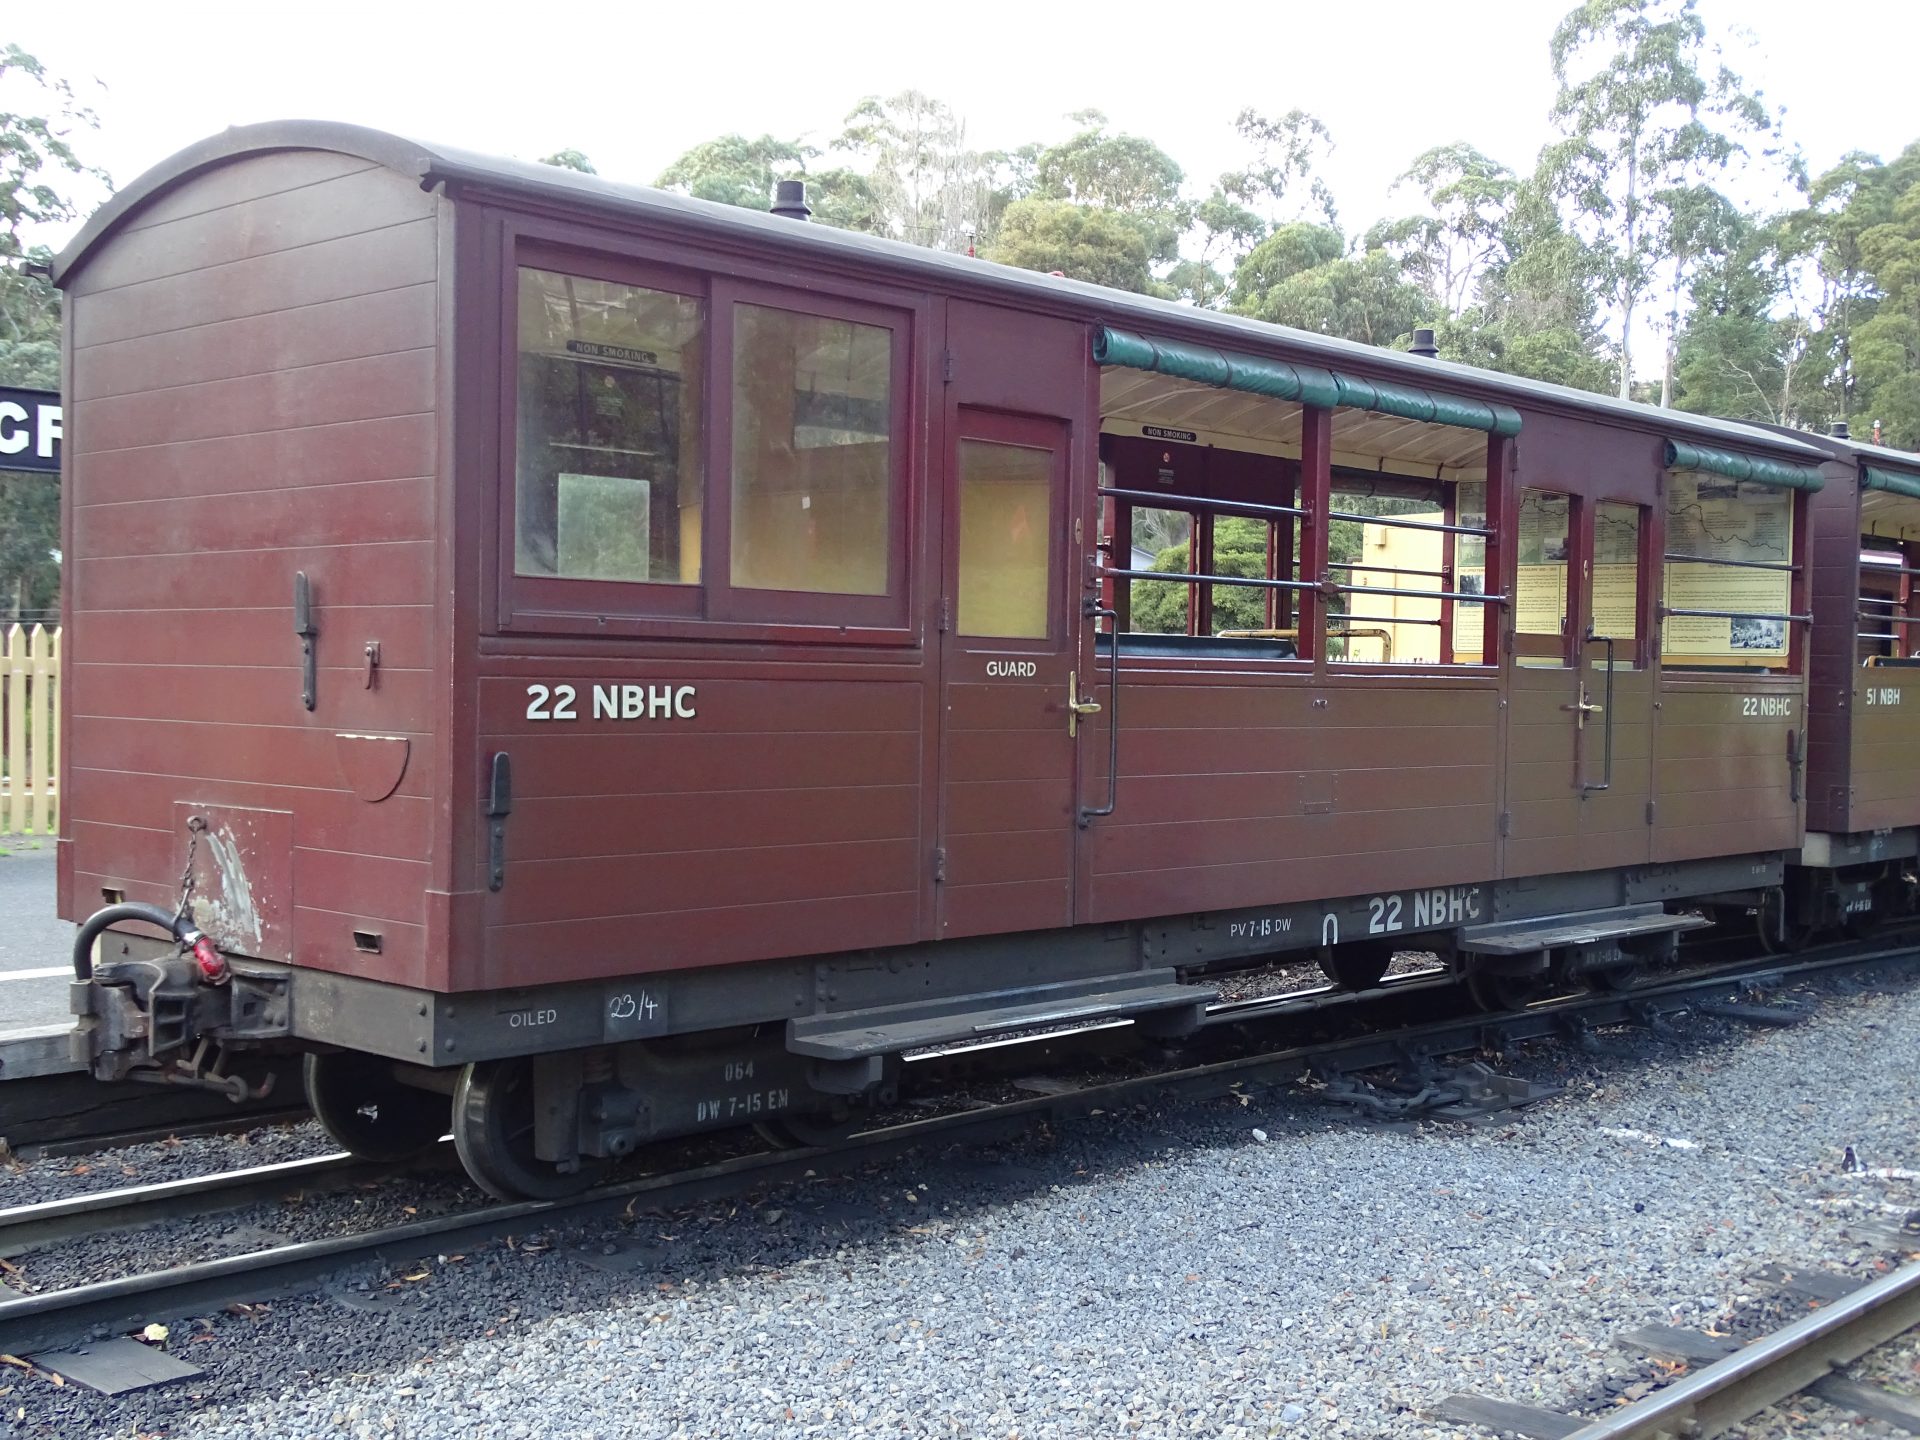 Puffing Billy Carriage NMM - Puffing Billy